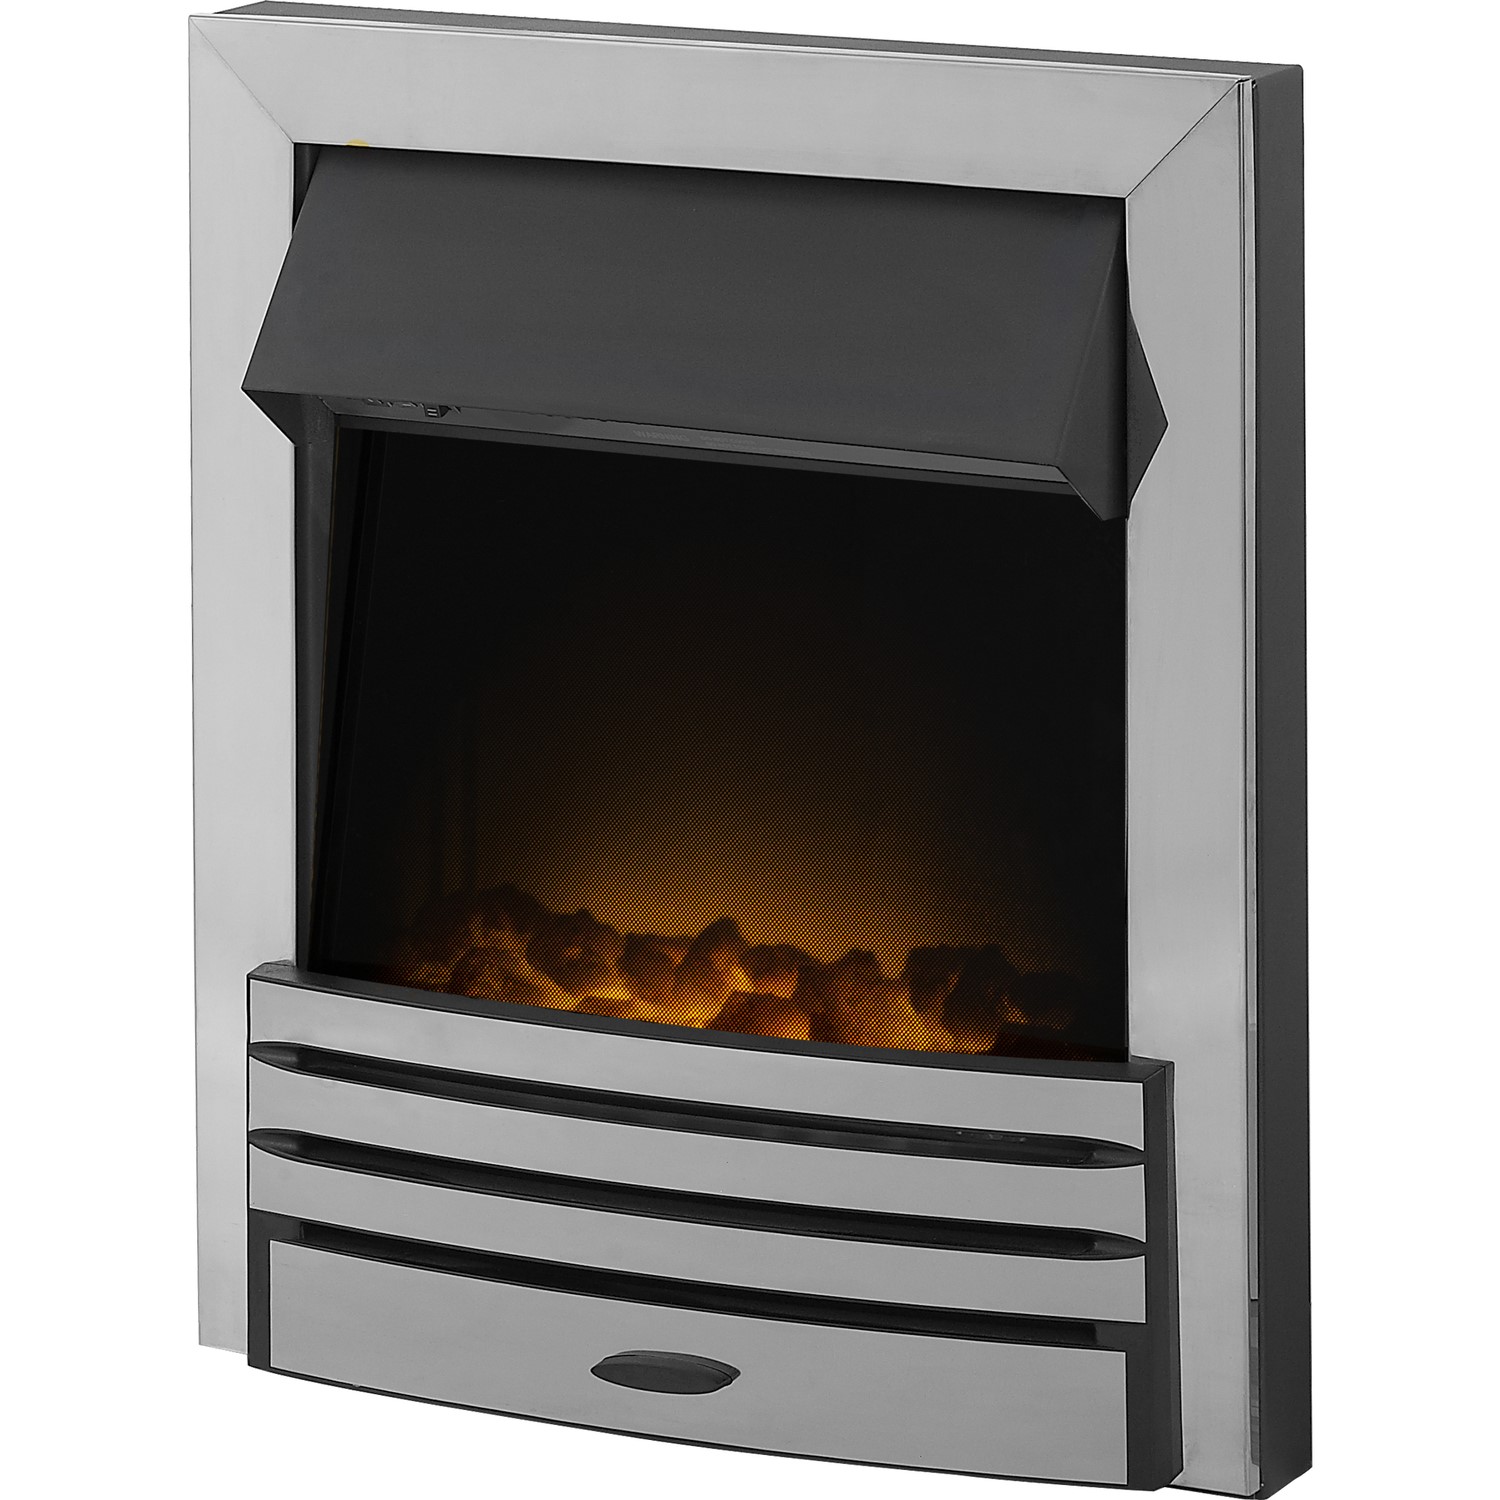 Read more about Adam chrome inset electric fire with remote control eclipse